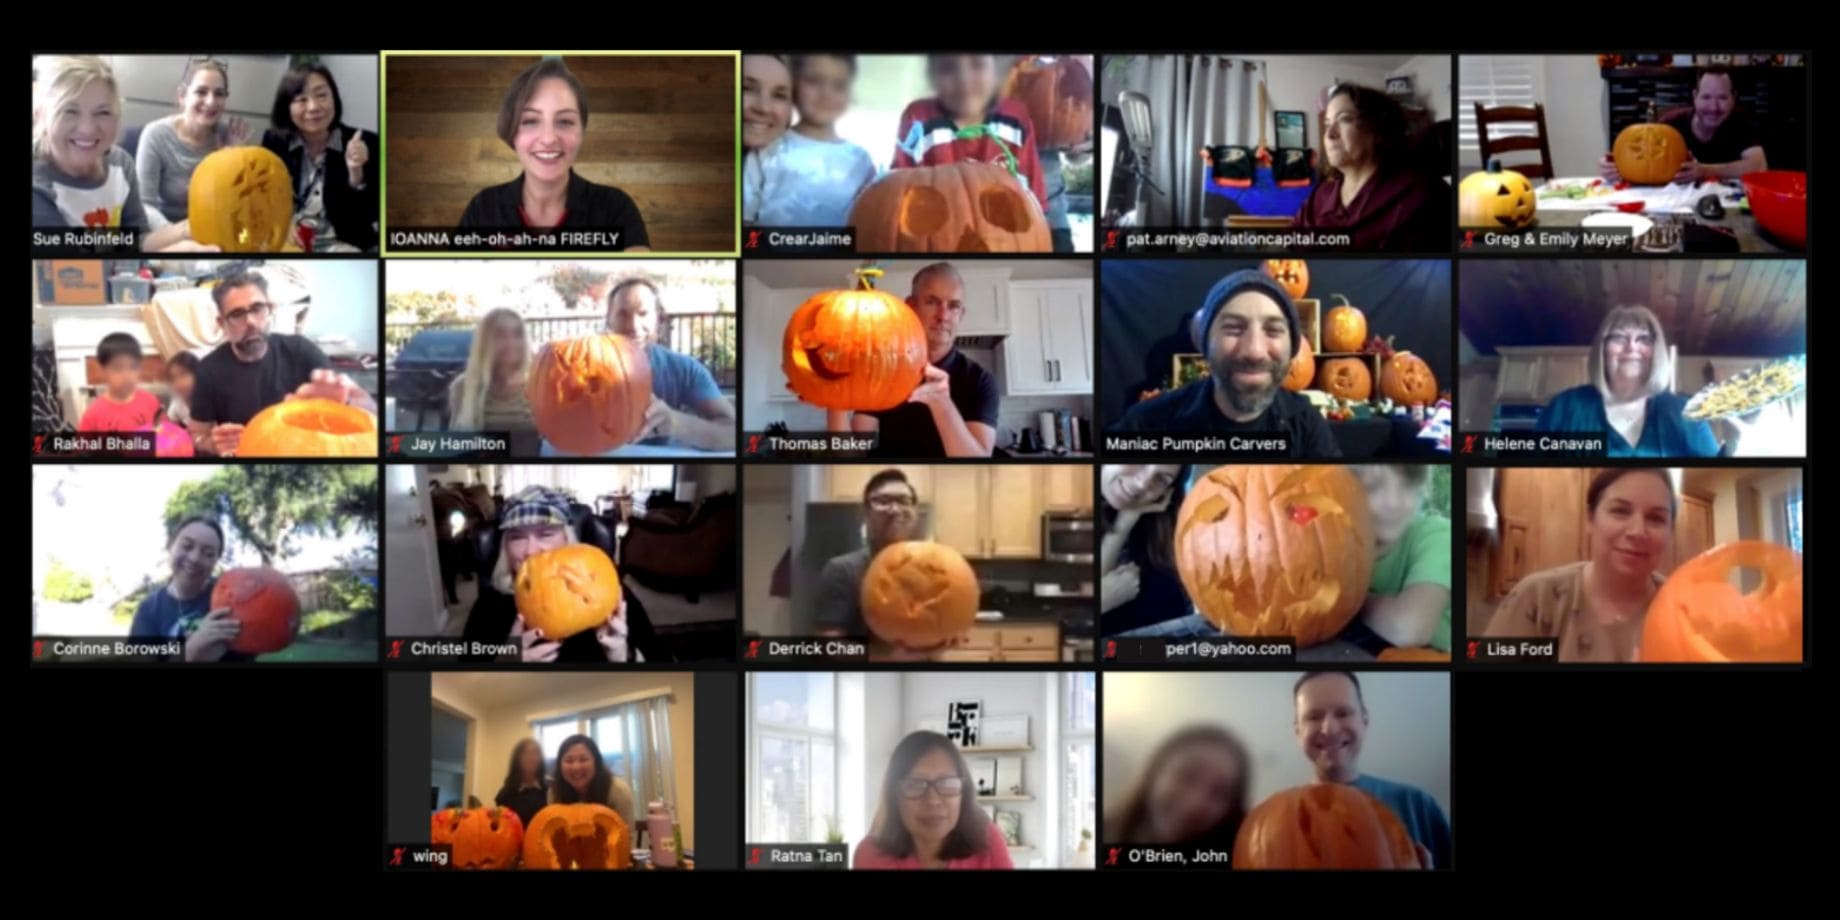 At a Halloween pumpkin carving event. Organized various events on Zoom to communicate between employees during pandemic.